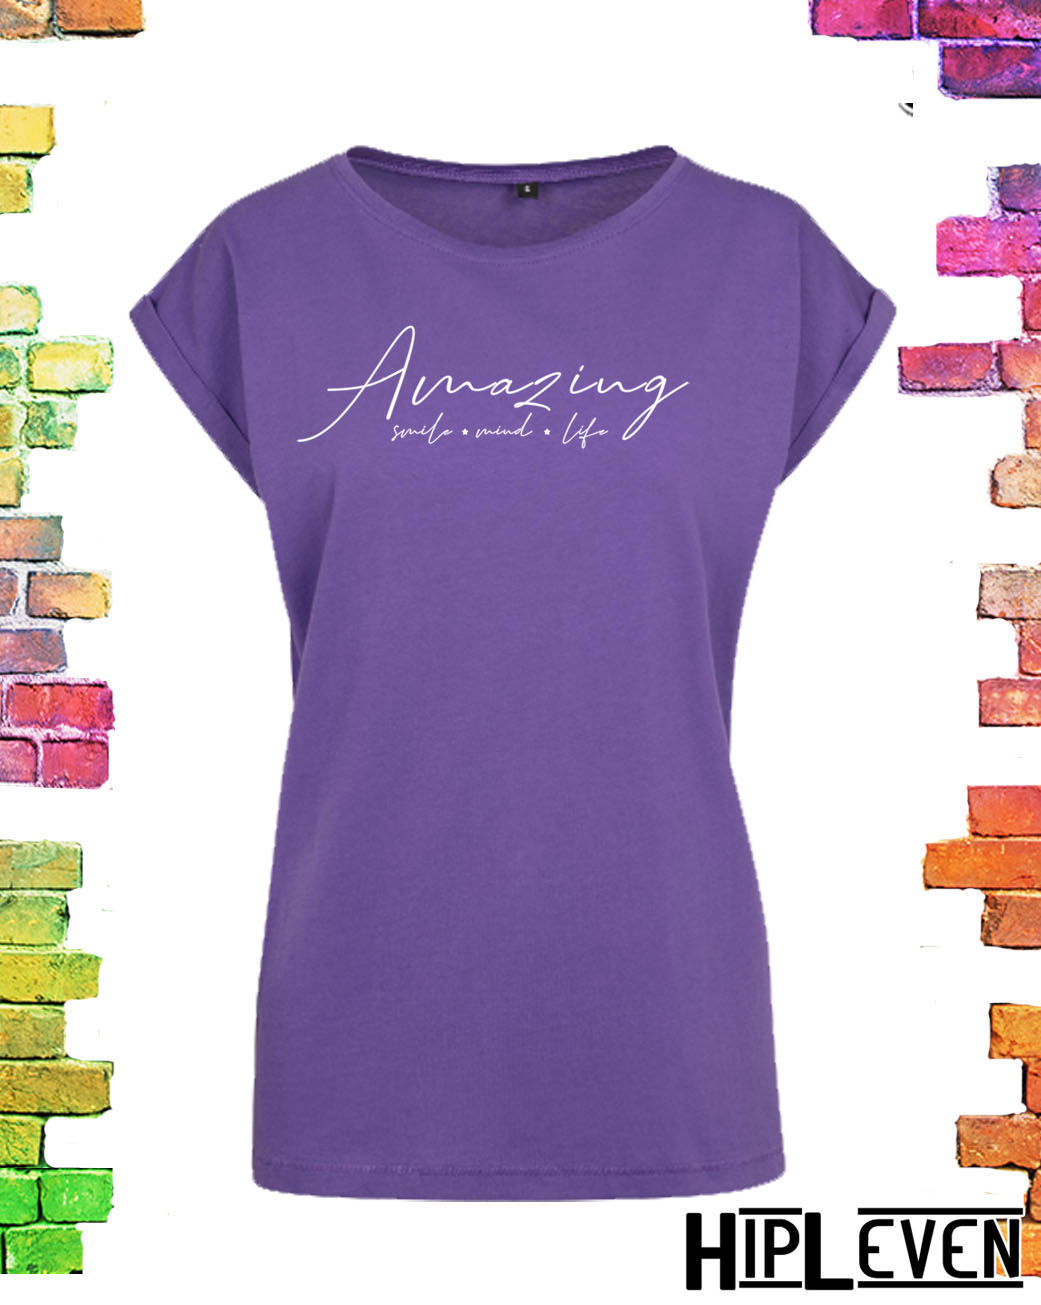 Grote maten mode plussize t-shirt paars Amazing